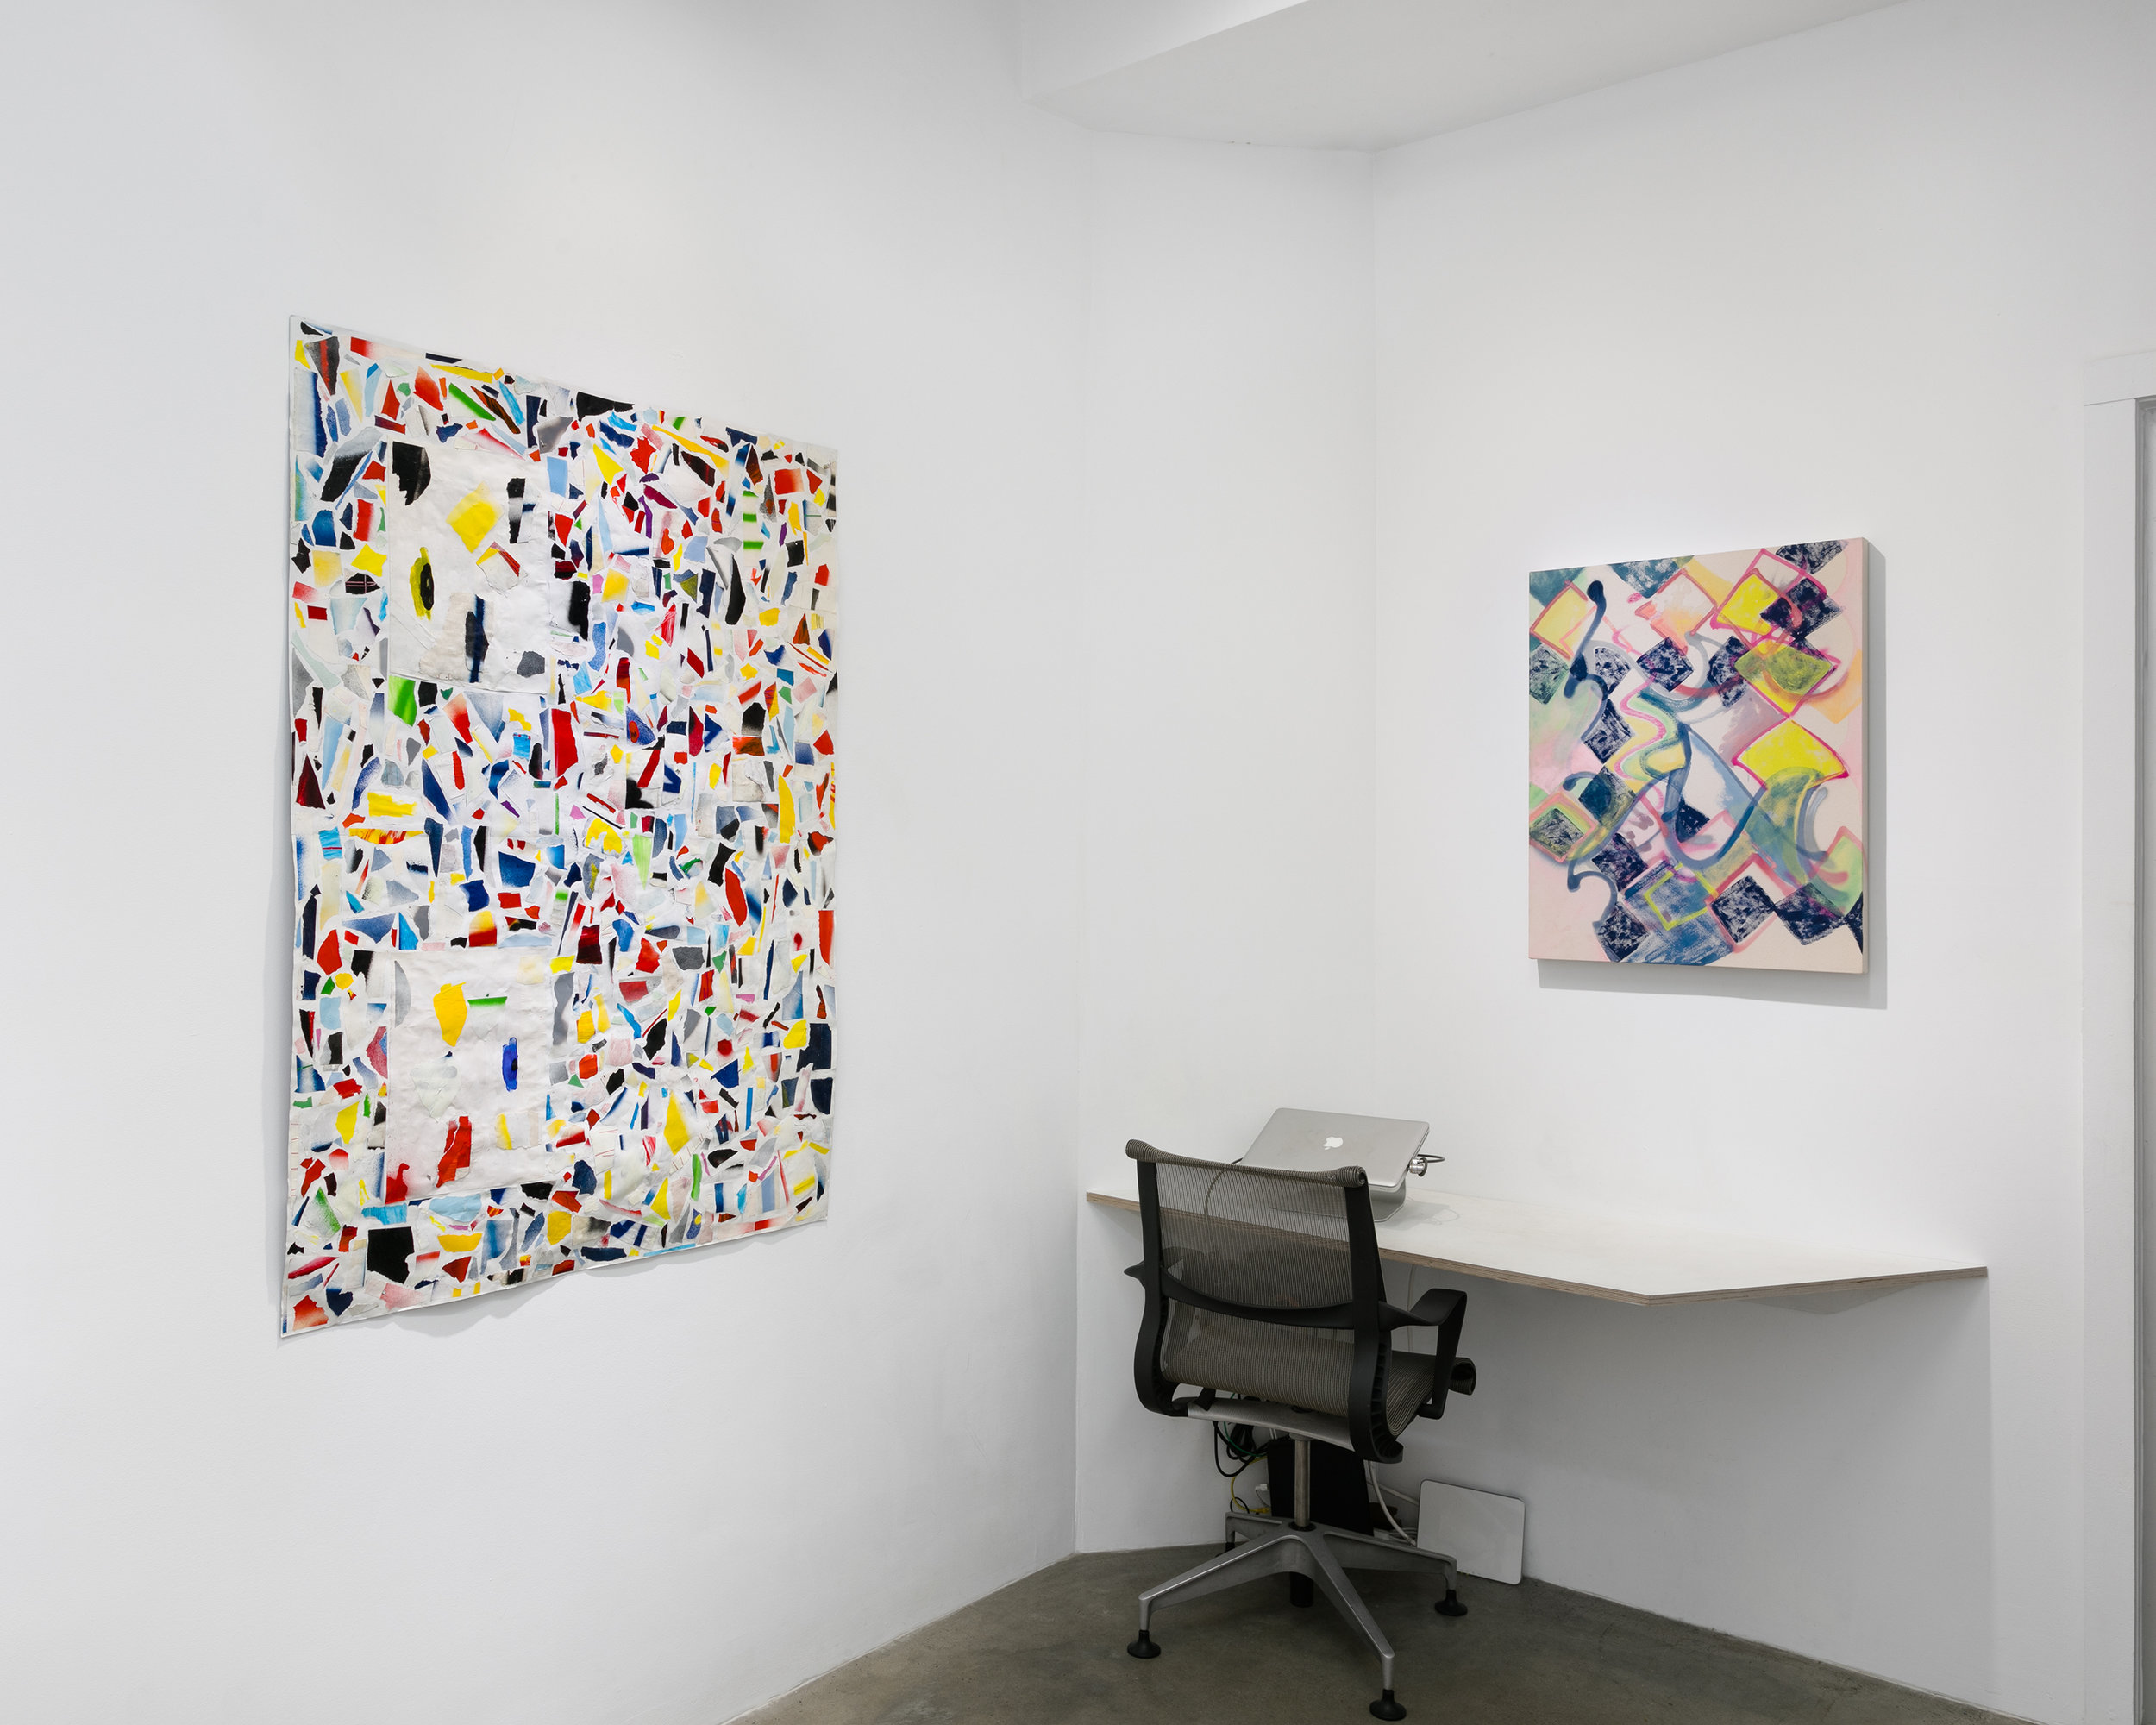 Installation view with work on paper by Josh Slater, painting by Lauren Portada